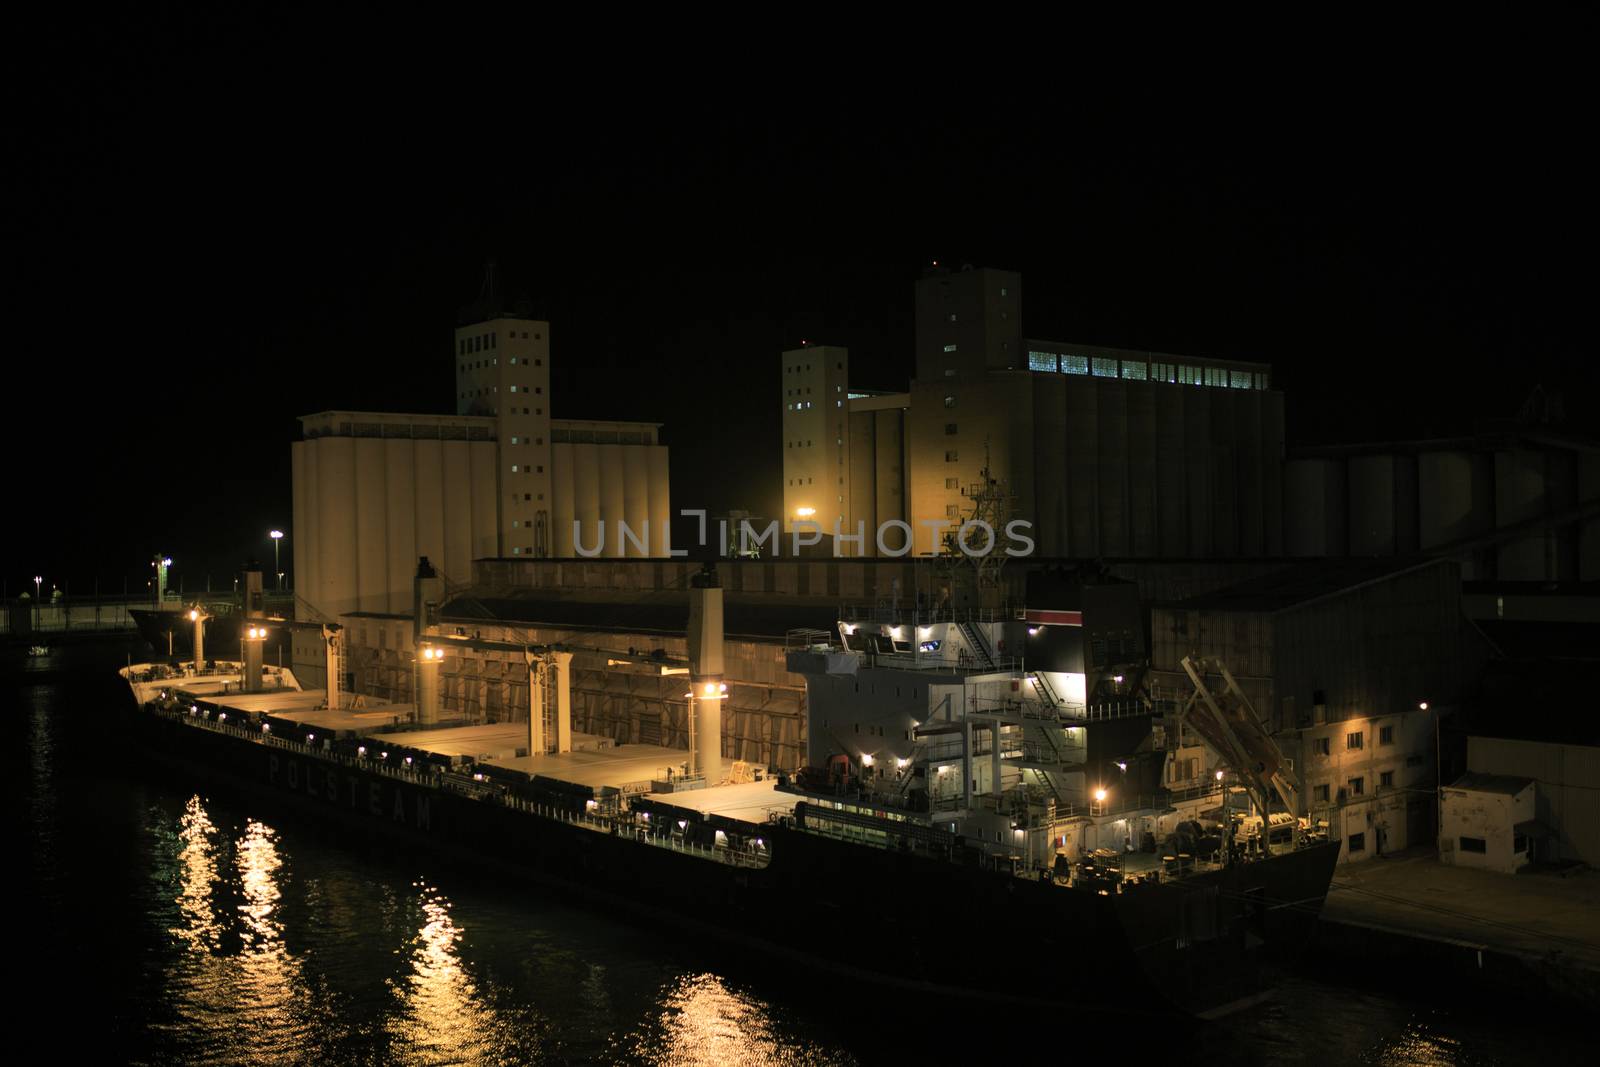 Industrial zone in Barcelona at night by nachrc2001